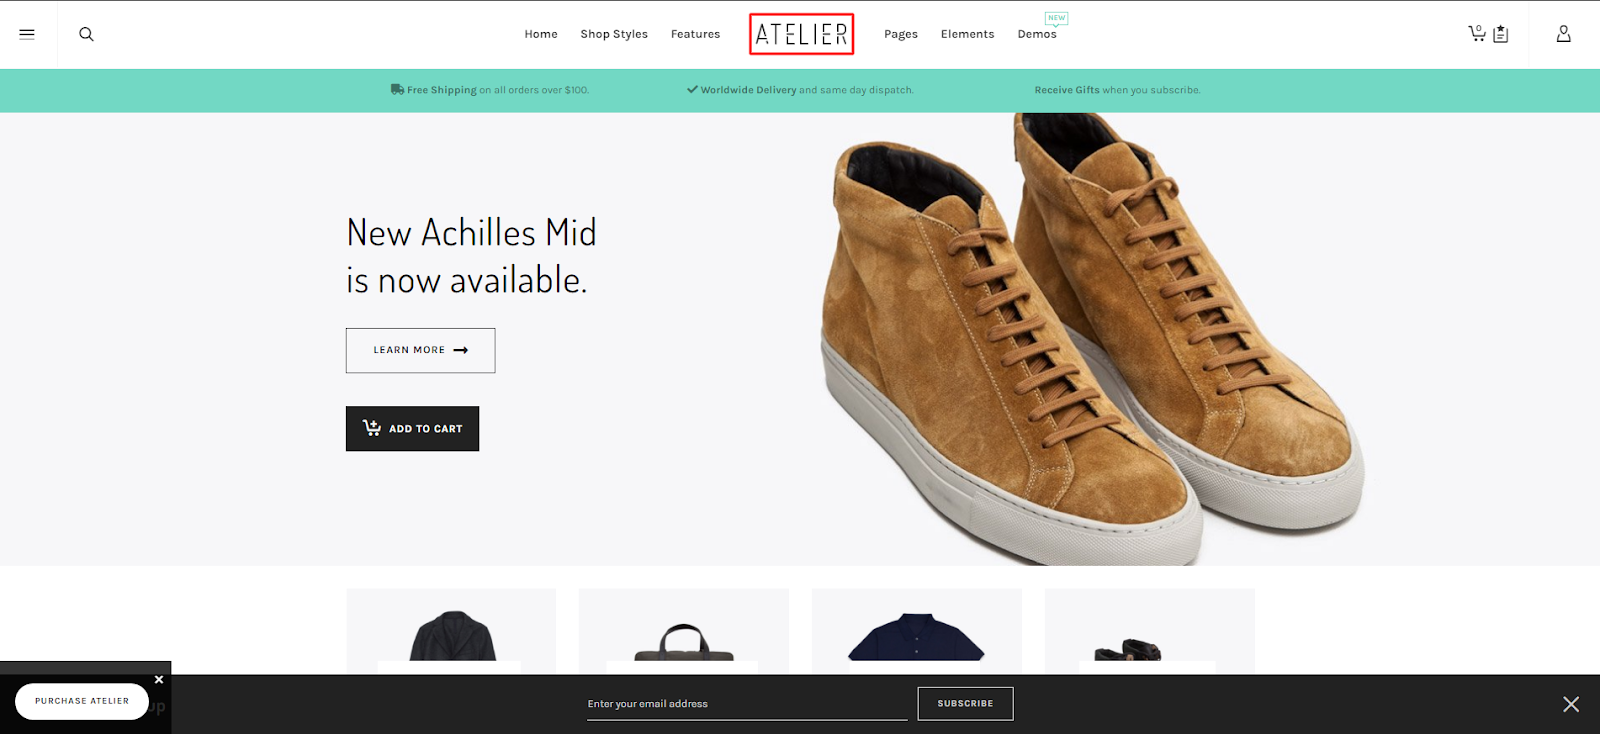 Atelier - Creative eCommerce Theme with Multiple Function 